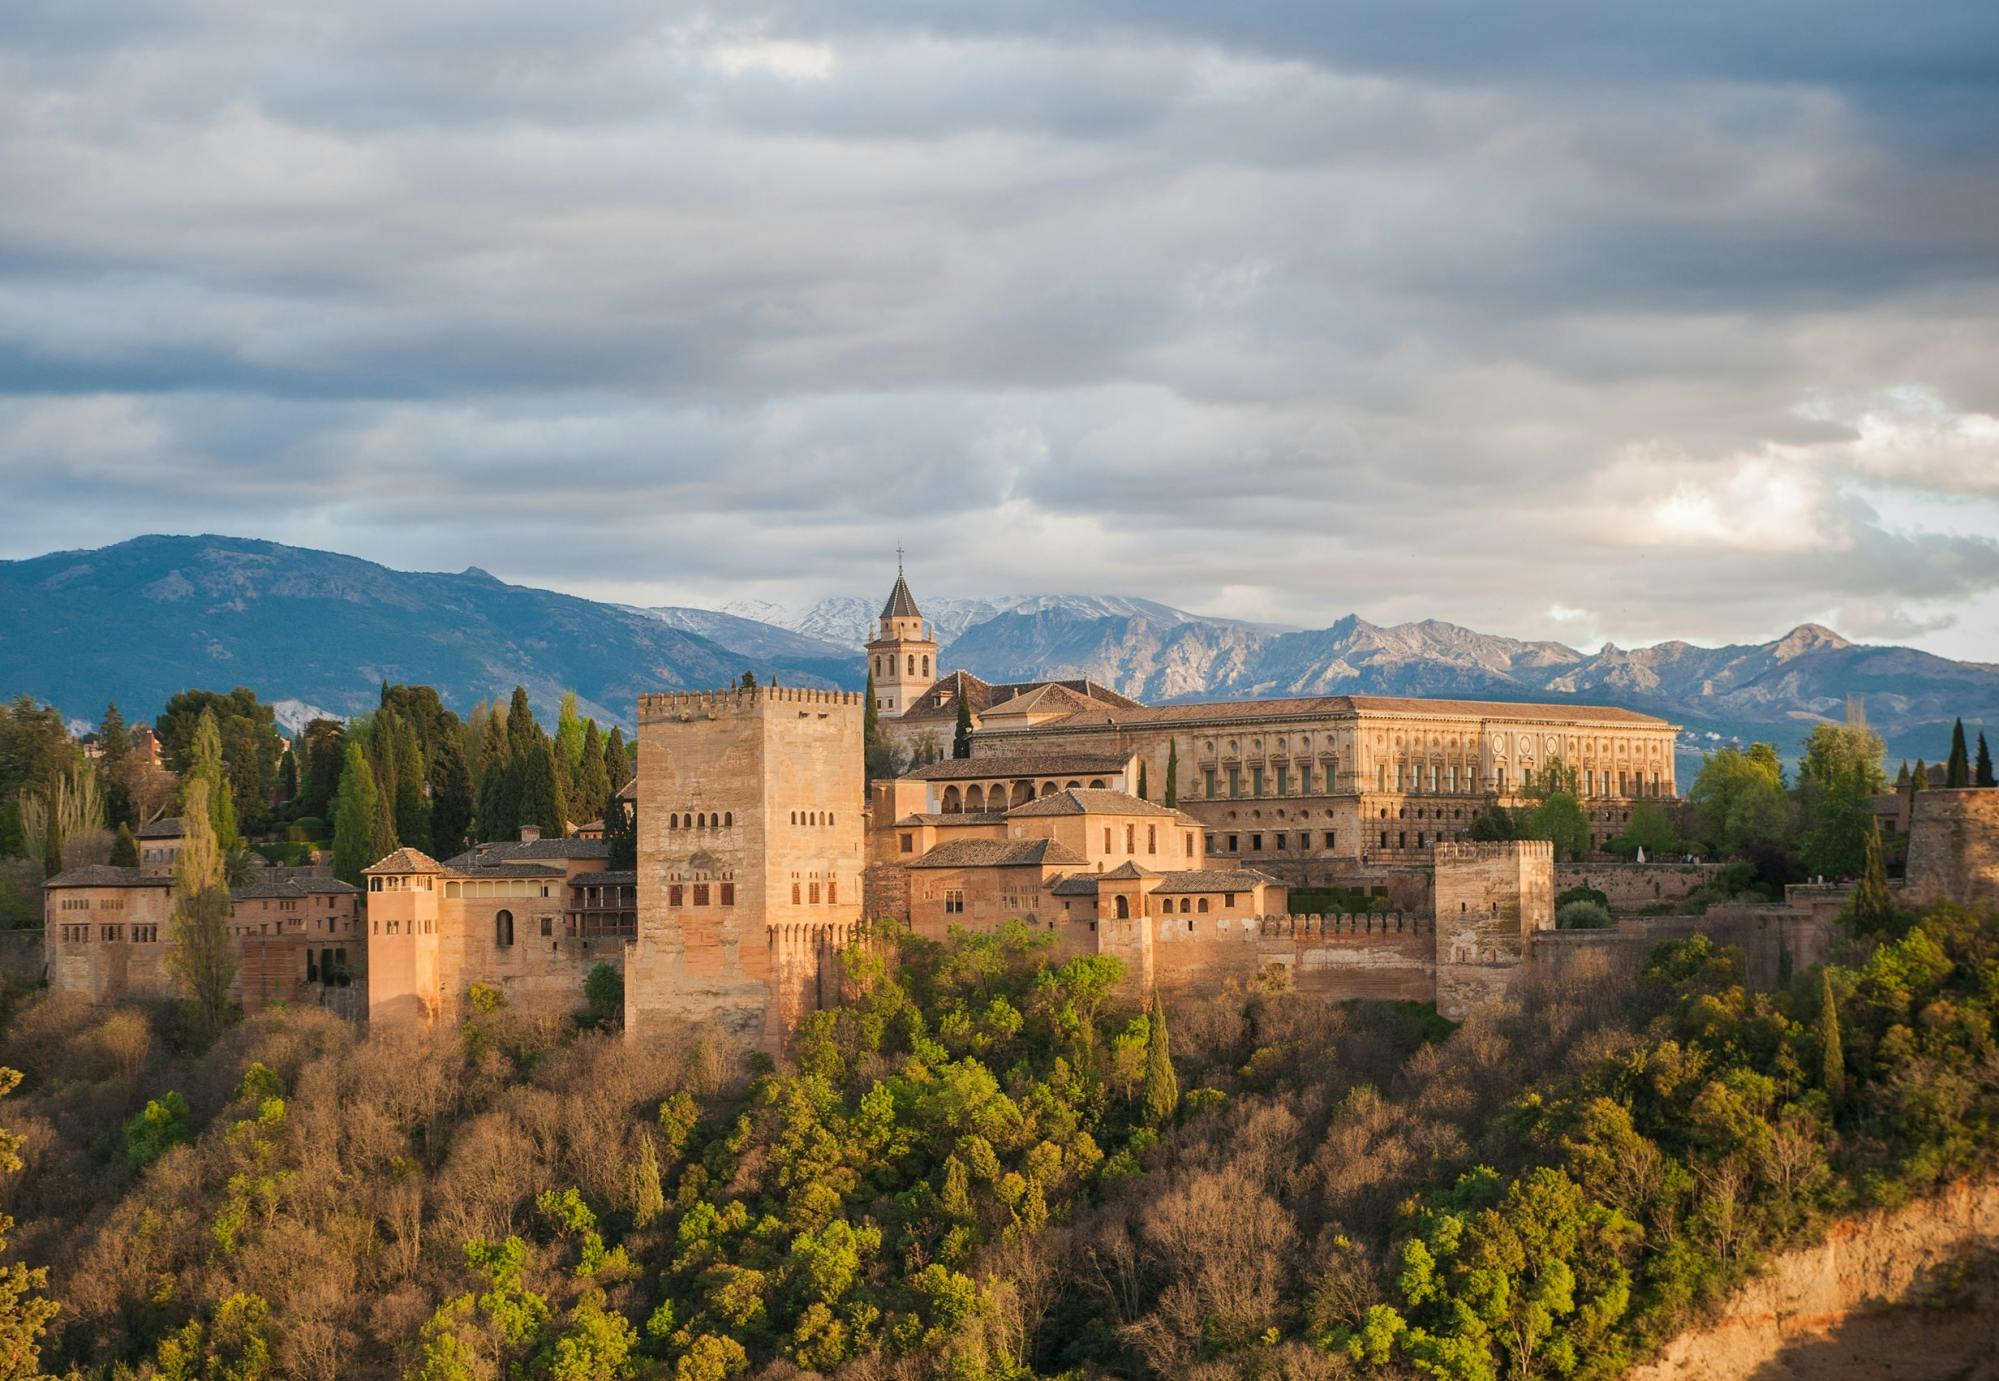 Alhambra Palace E-ticket with smartphone audio tour